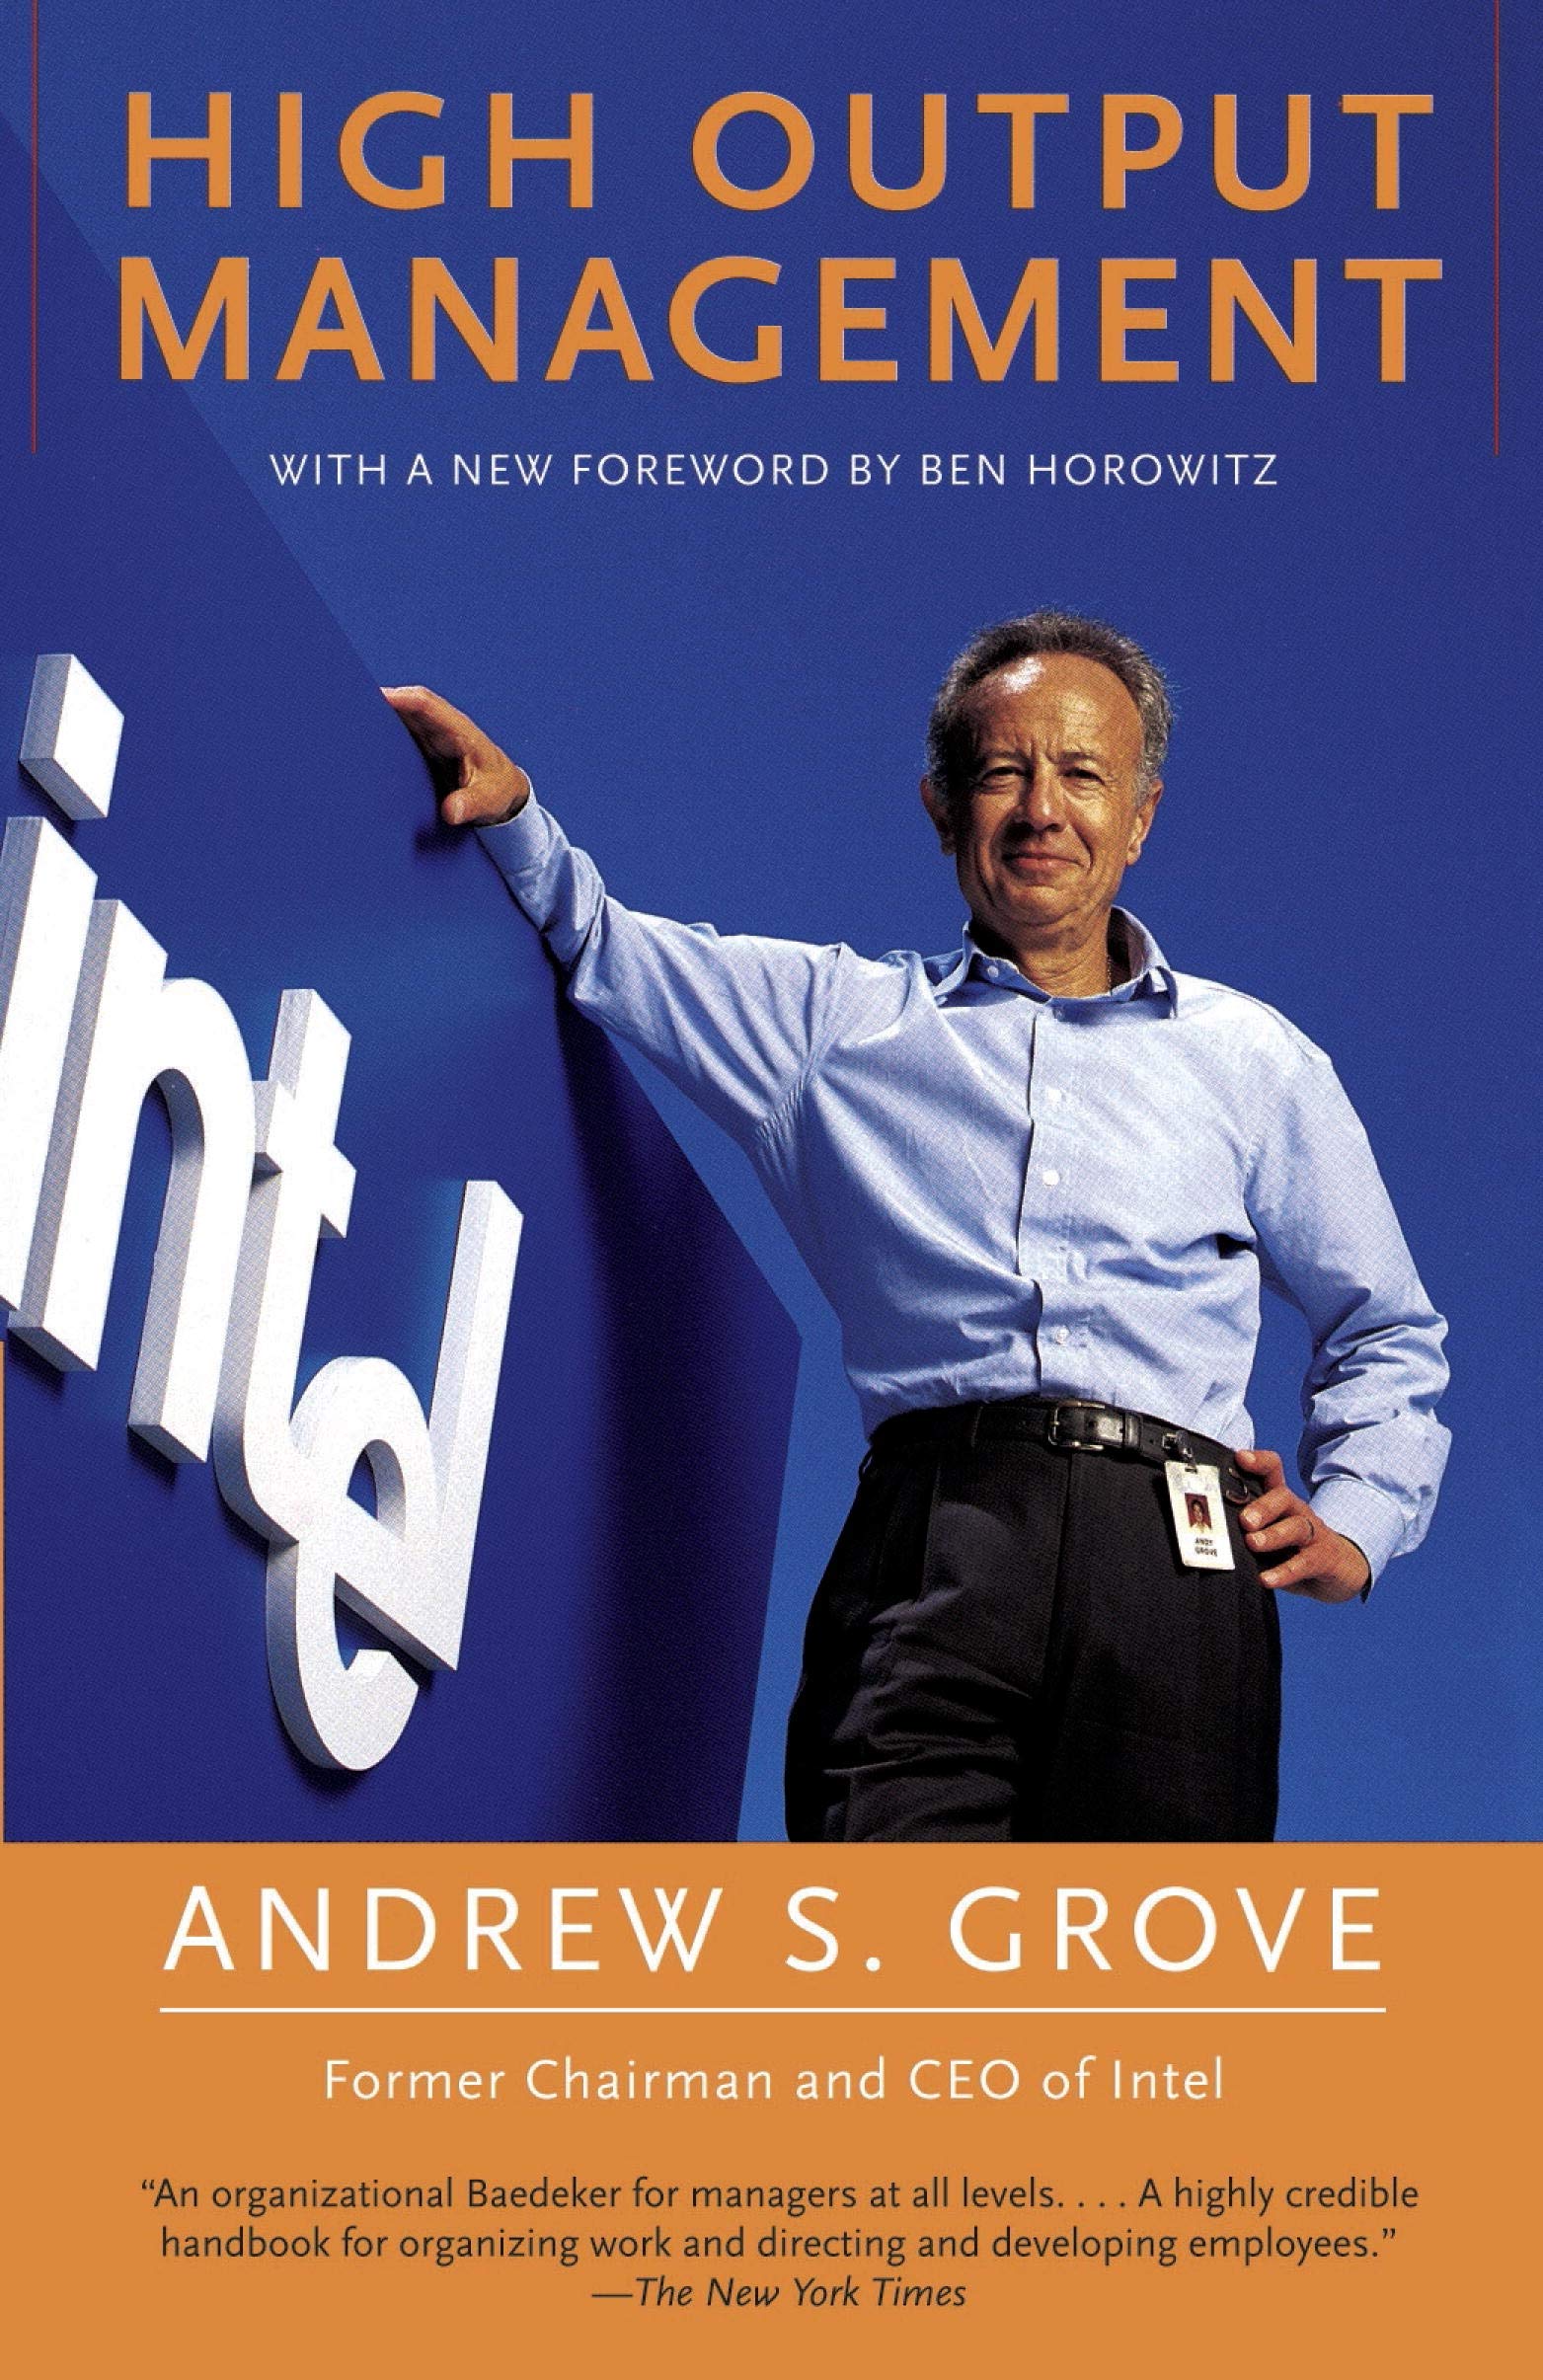 High Output Management by Andy Grove